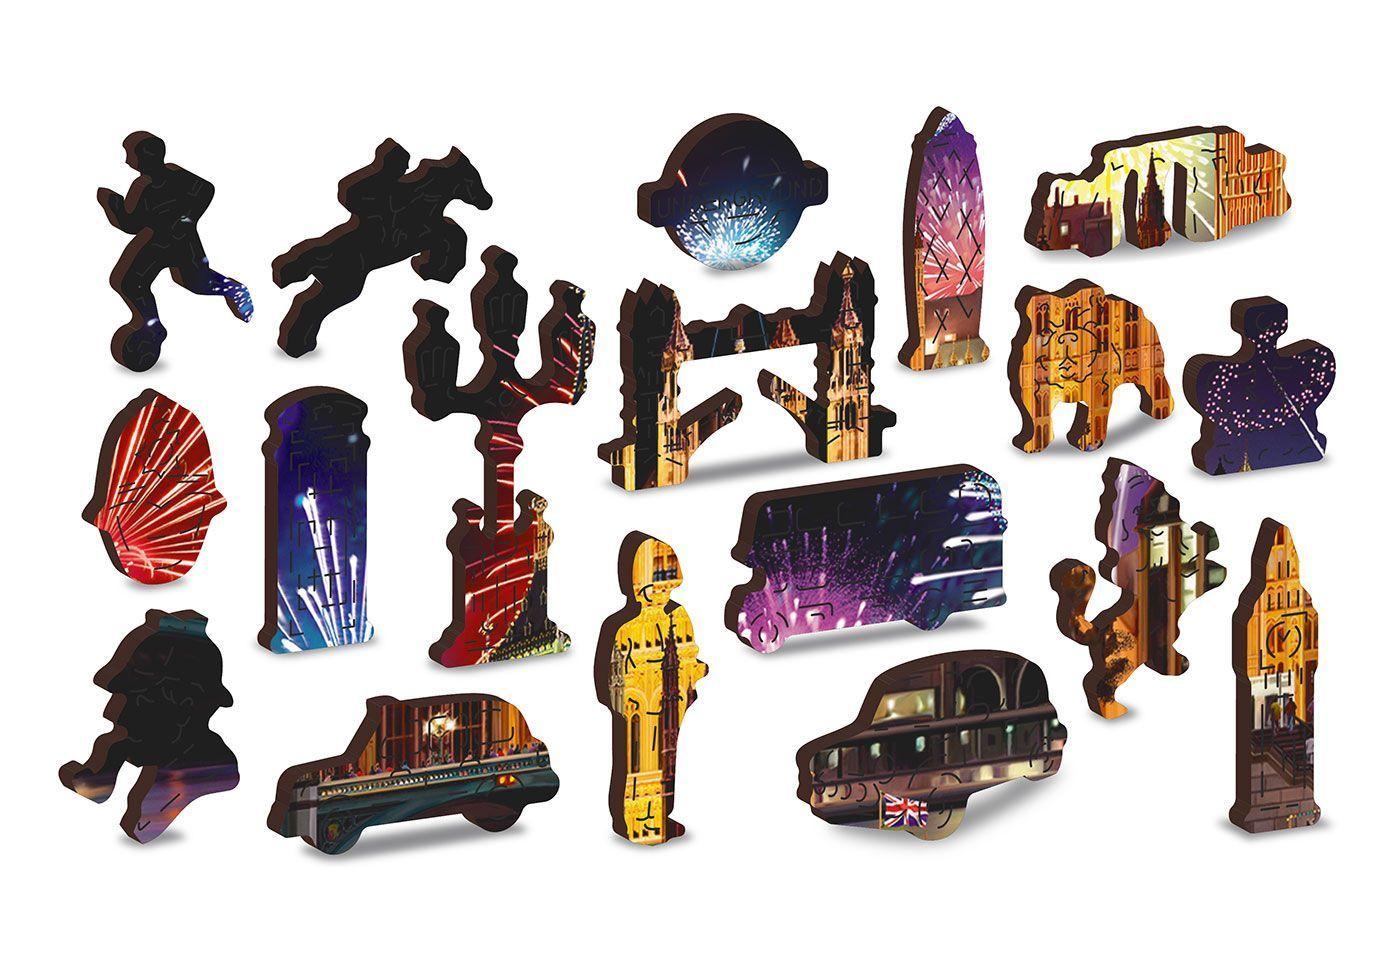 Wooden Puzzle with Figurines - London by Night L 505  pieces